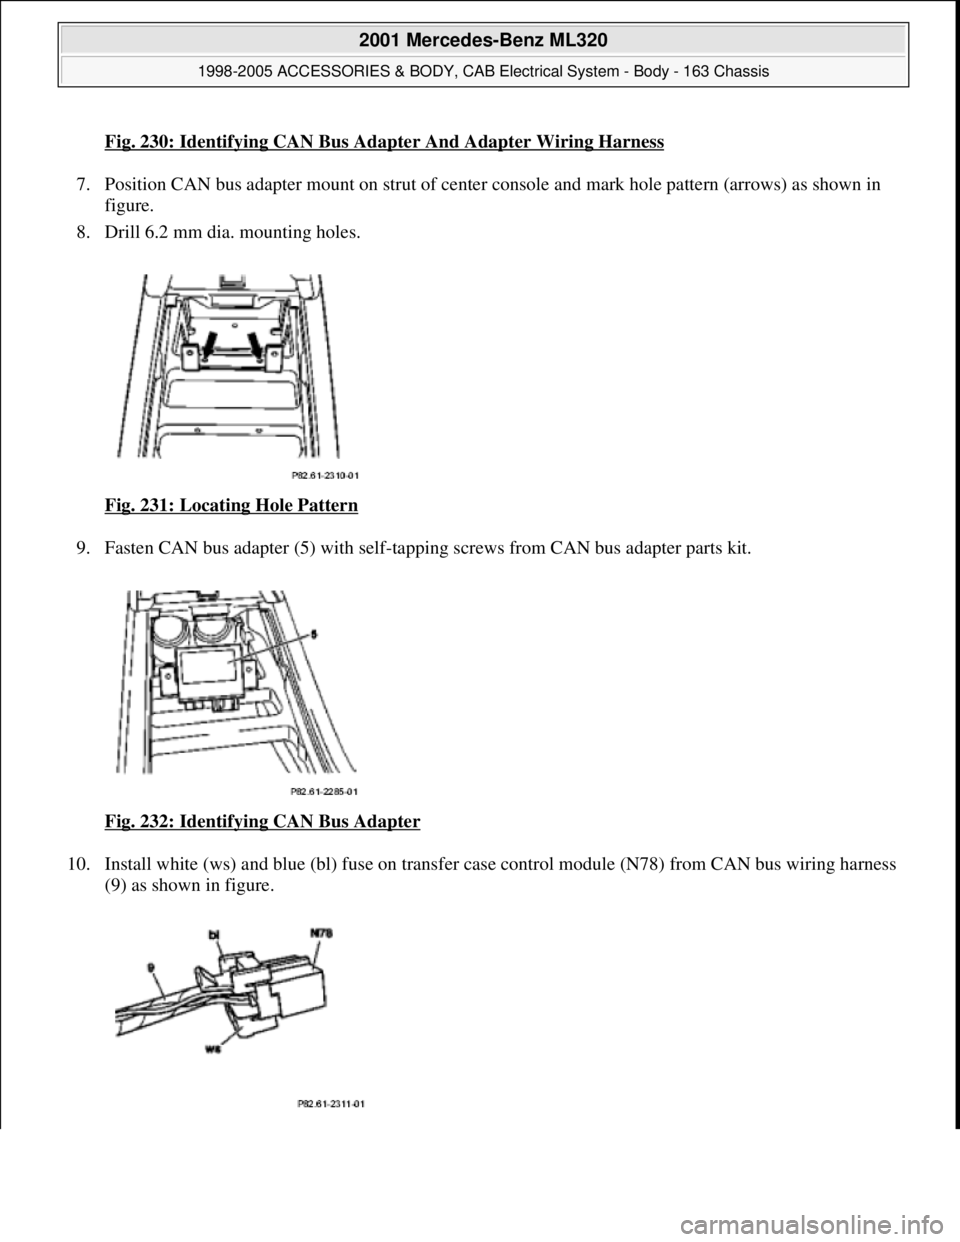 MERCEDES-BENZ ML350 1997  Complete Repair Manual Fig. 230: Identifying CAN Bus Adapter And Adapter Wiring Harness
7. Position CAN bus adapter mount on st rut of center console and mark hole pattern (arrows) as shown in  
figure.   
8. Drill 6.2 mm d